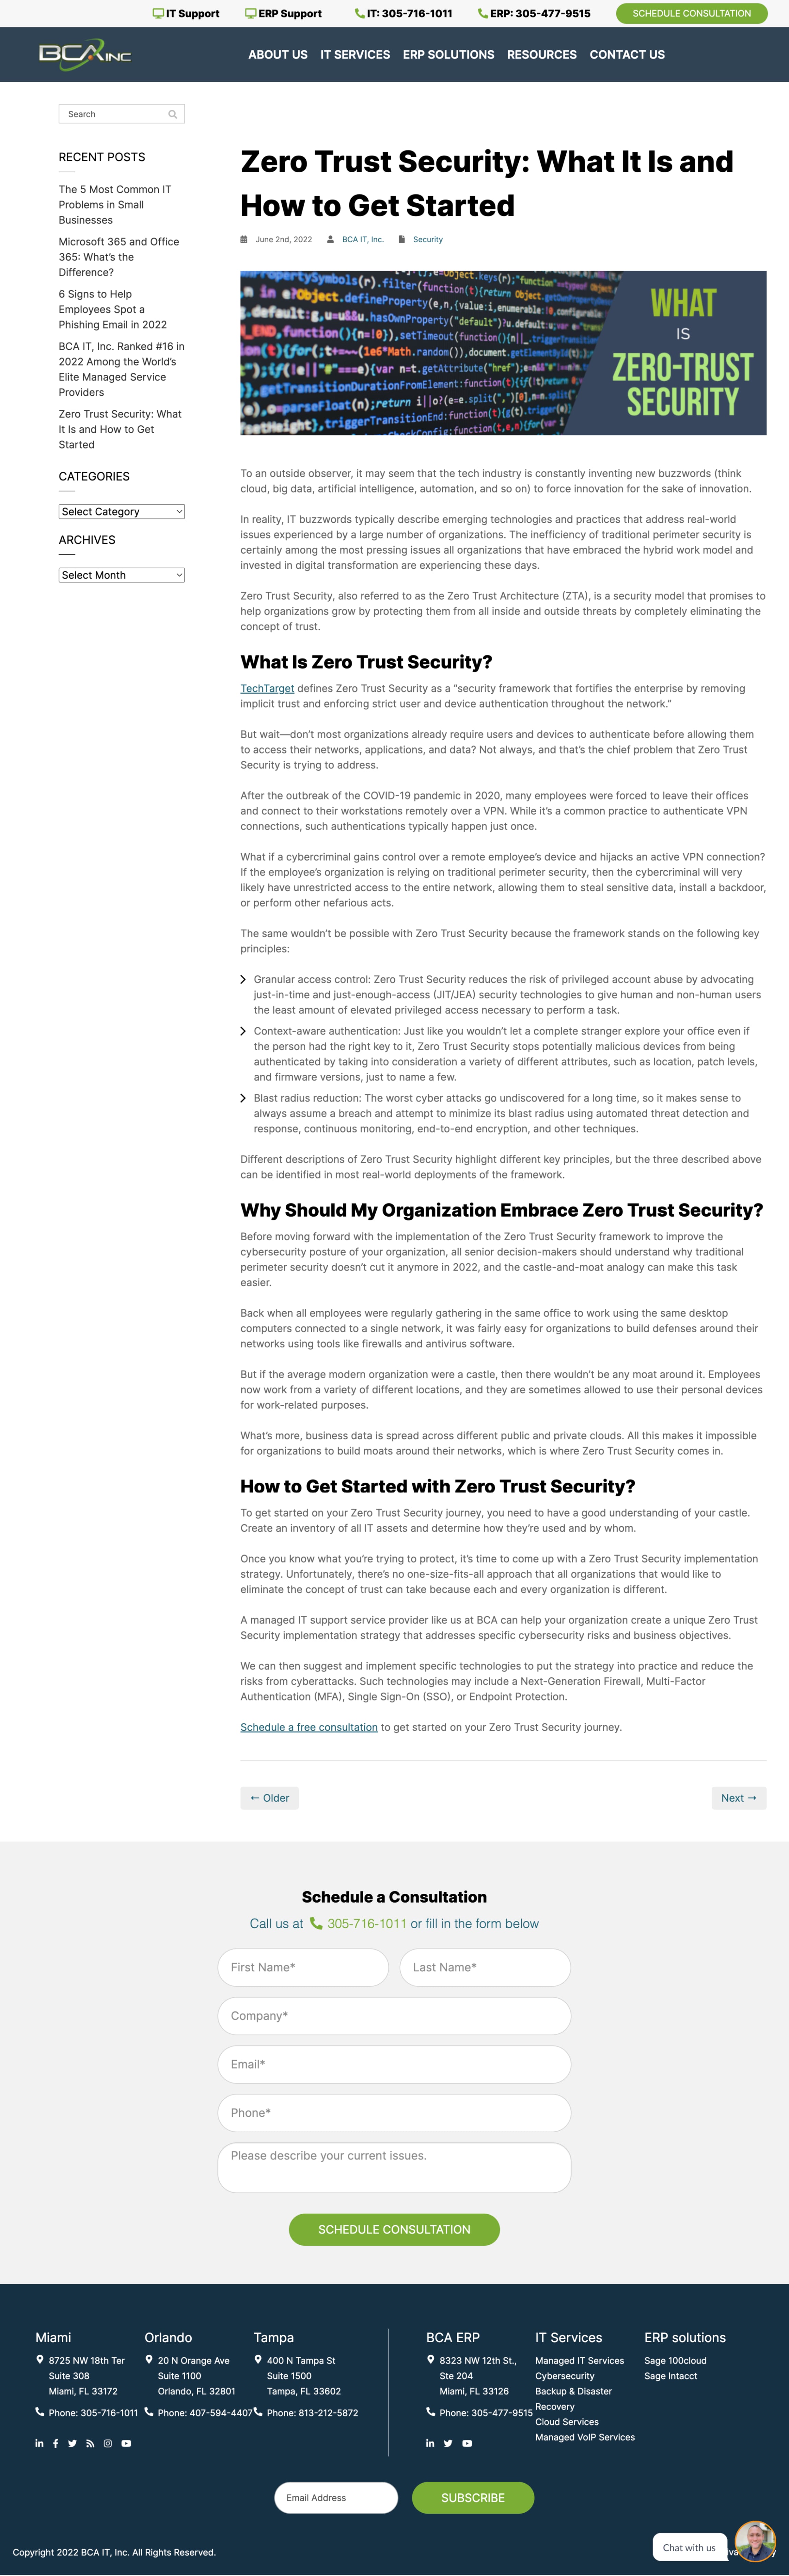 Zero Trust Security: What It Is and How to Get Started